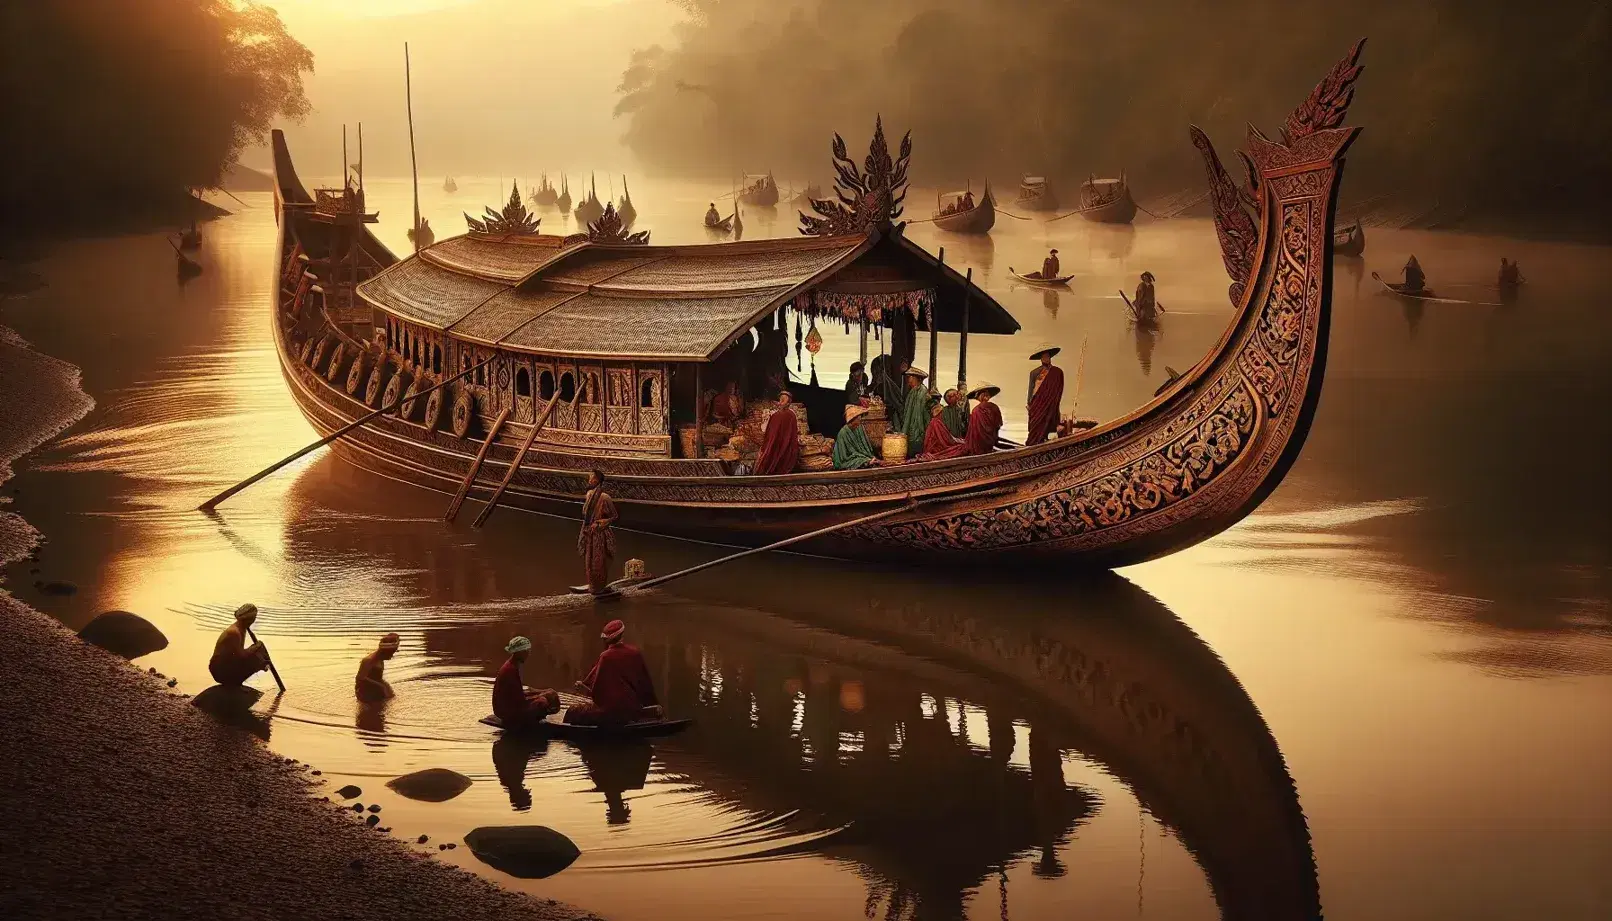 Traditional wooden vessel on a serene river at sunrise, with ornate carvings and people in colorful attire, surrounded by lush tropical vegetation.